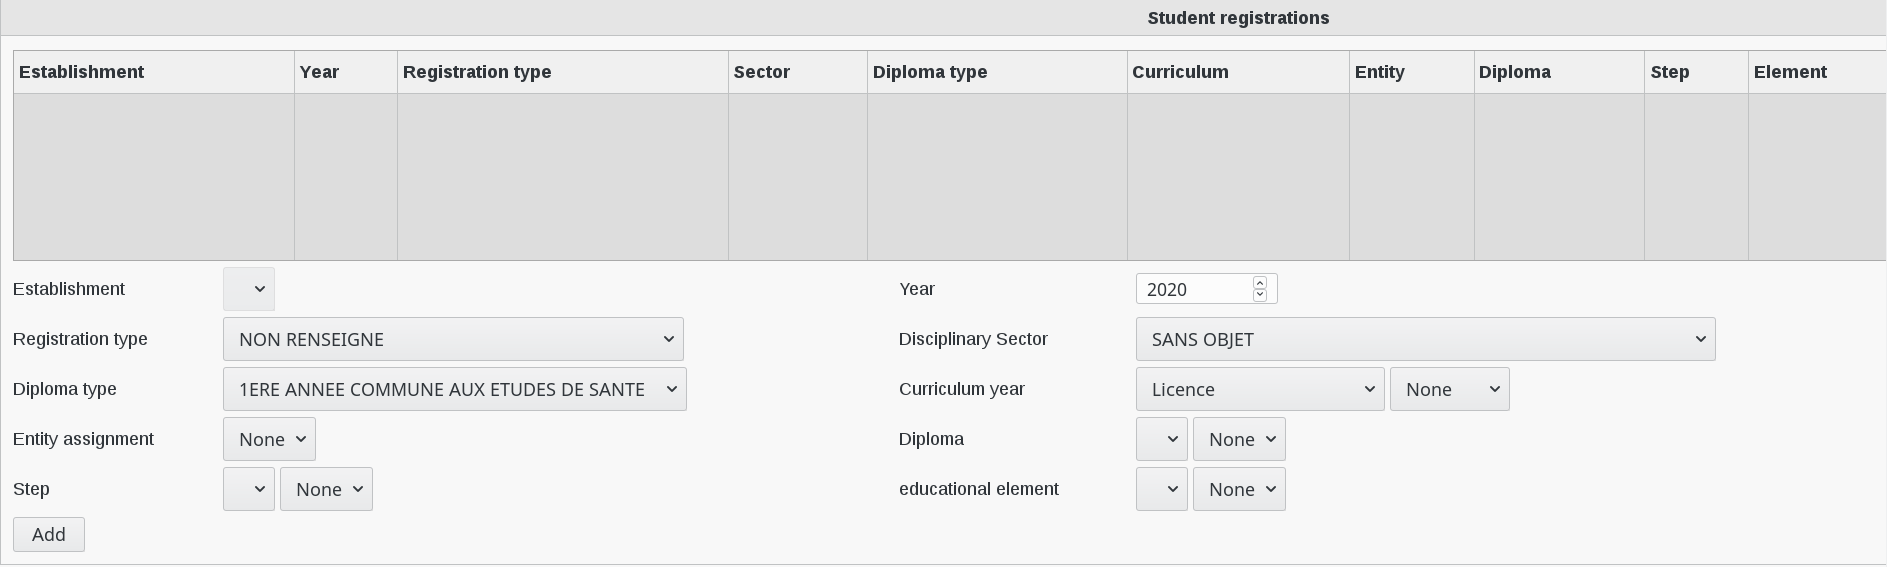 Picture of student registratons settings in FusionDirectory